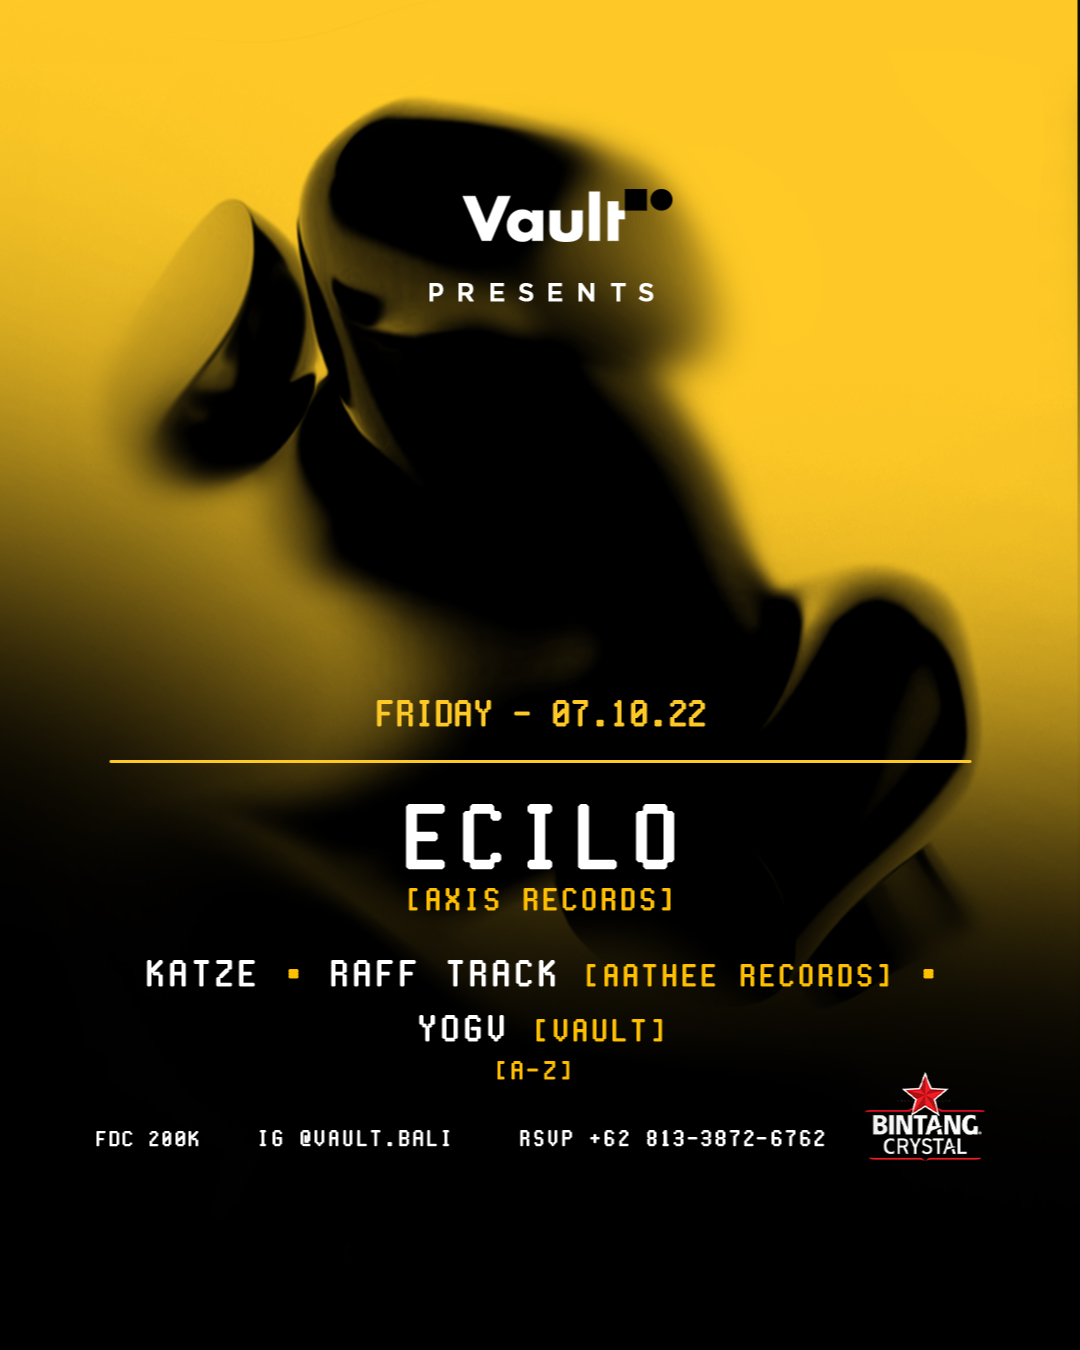 VAULT PRESENTS… ECILO ON FRIDAY OCTOBER 7TH thumbnail image